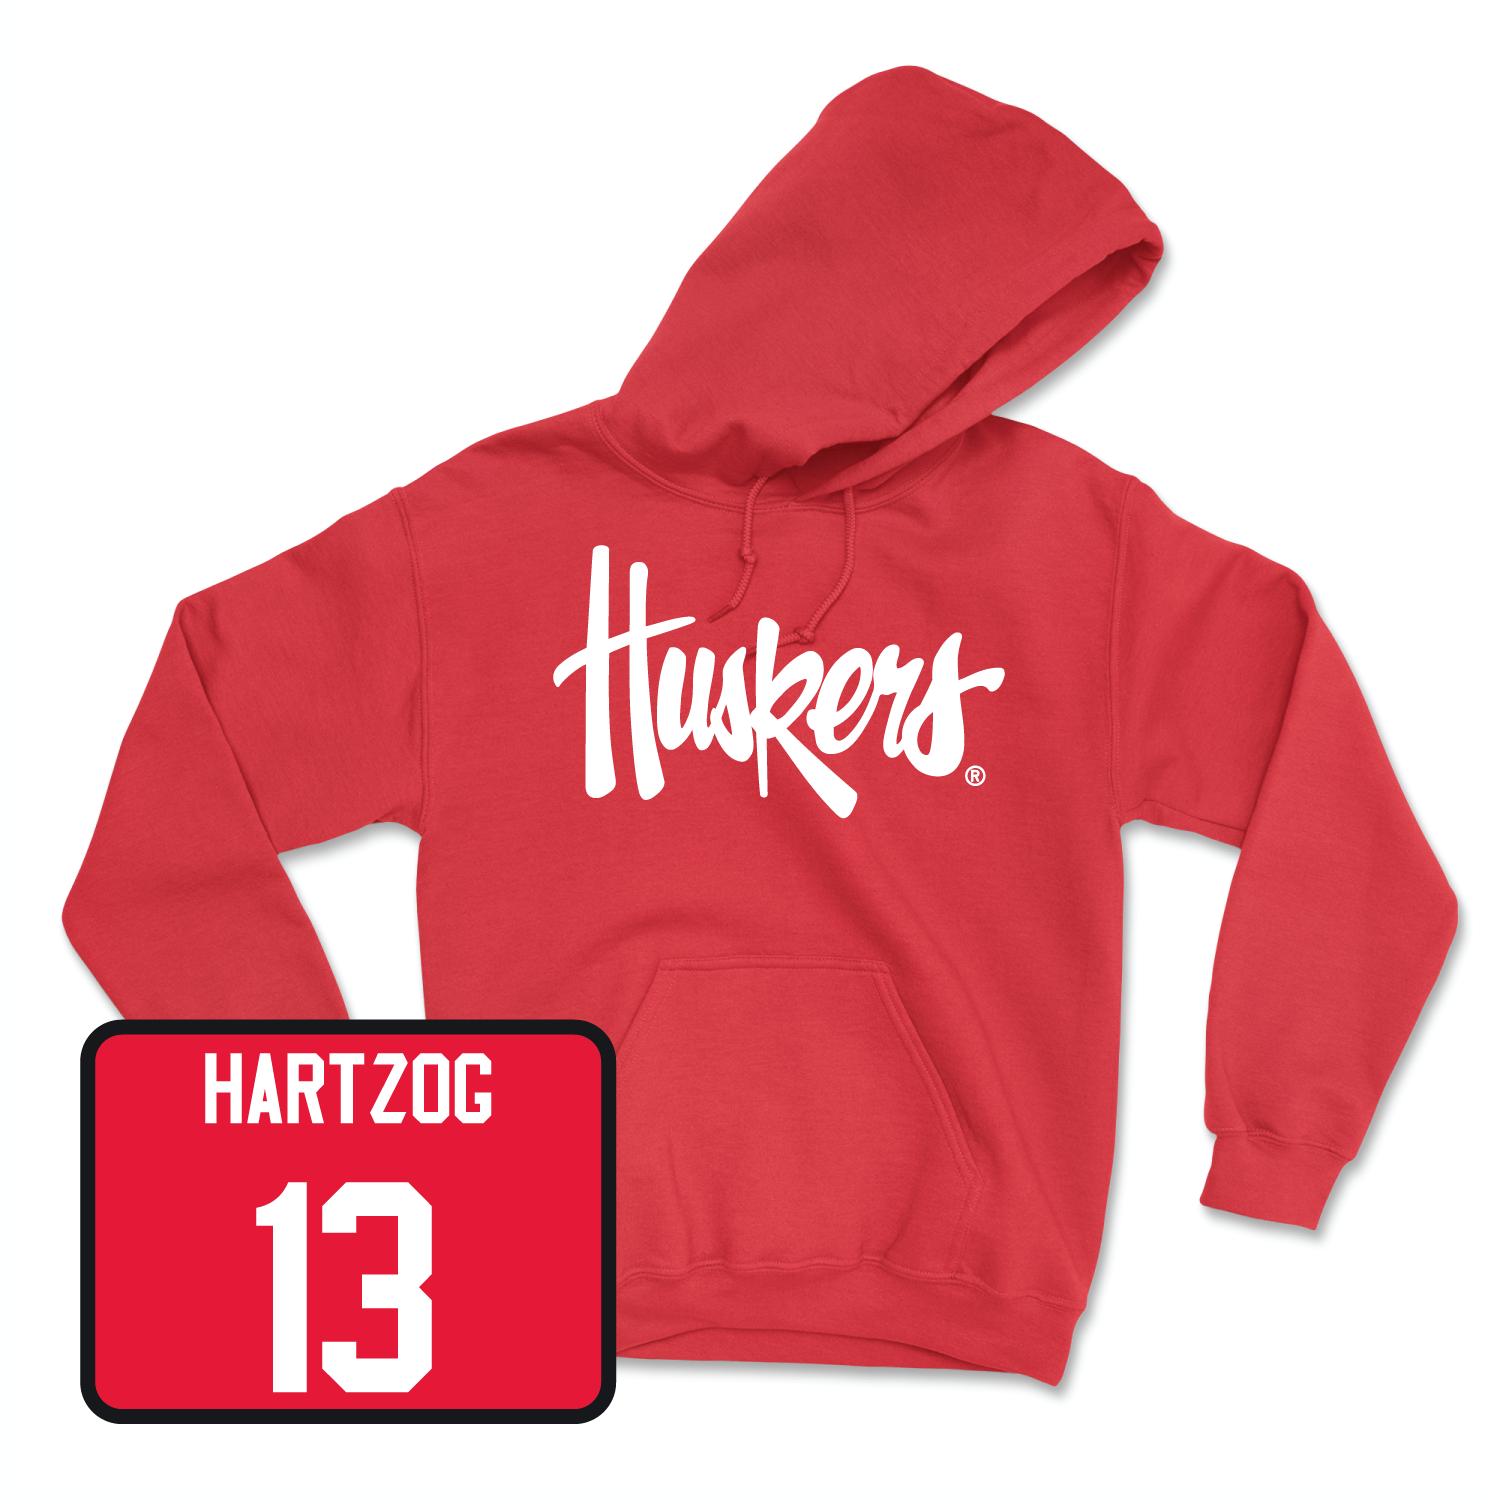 Red Football Huskers Hoodie 2 4X-Large / Malcolm Hartzog | #13